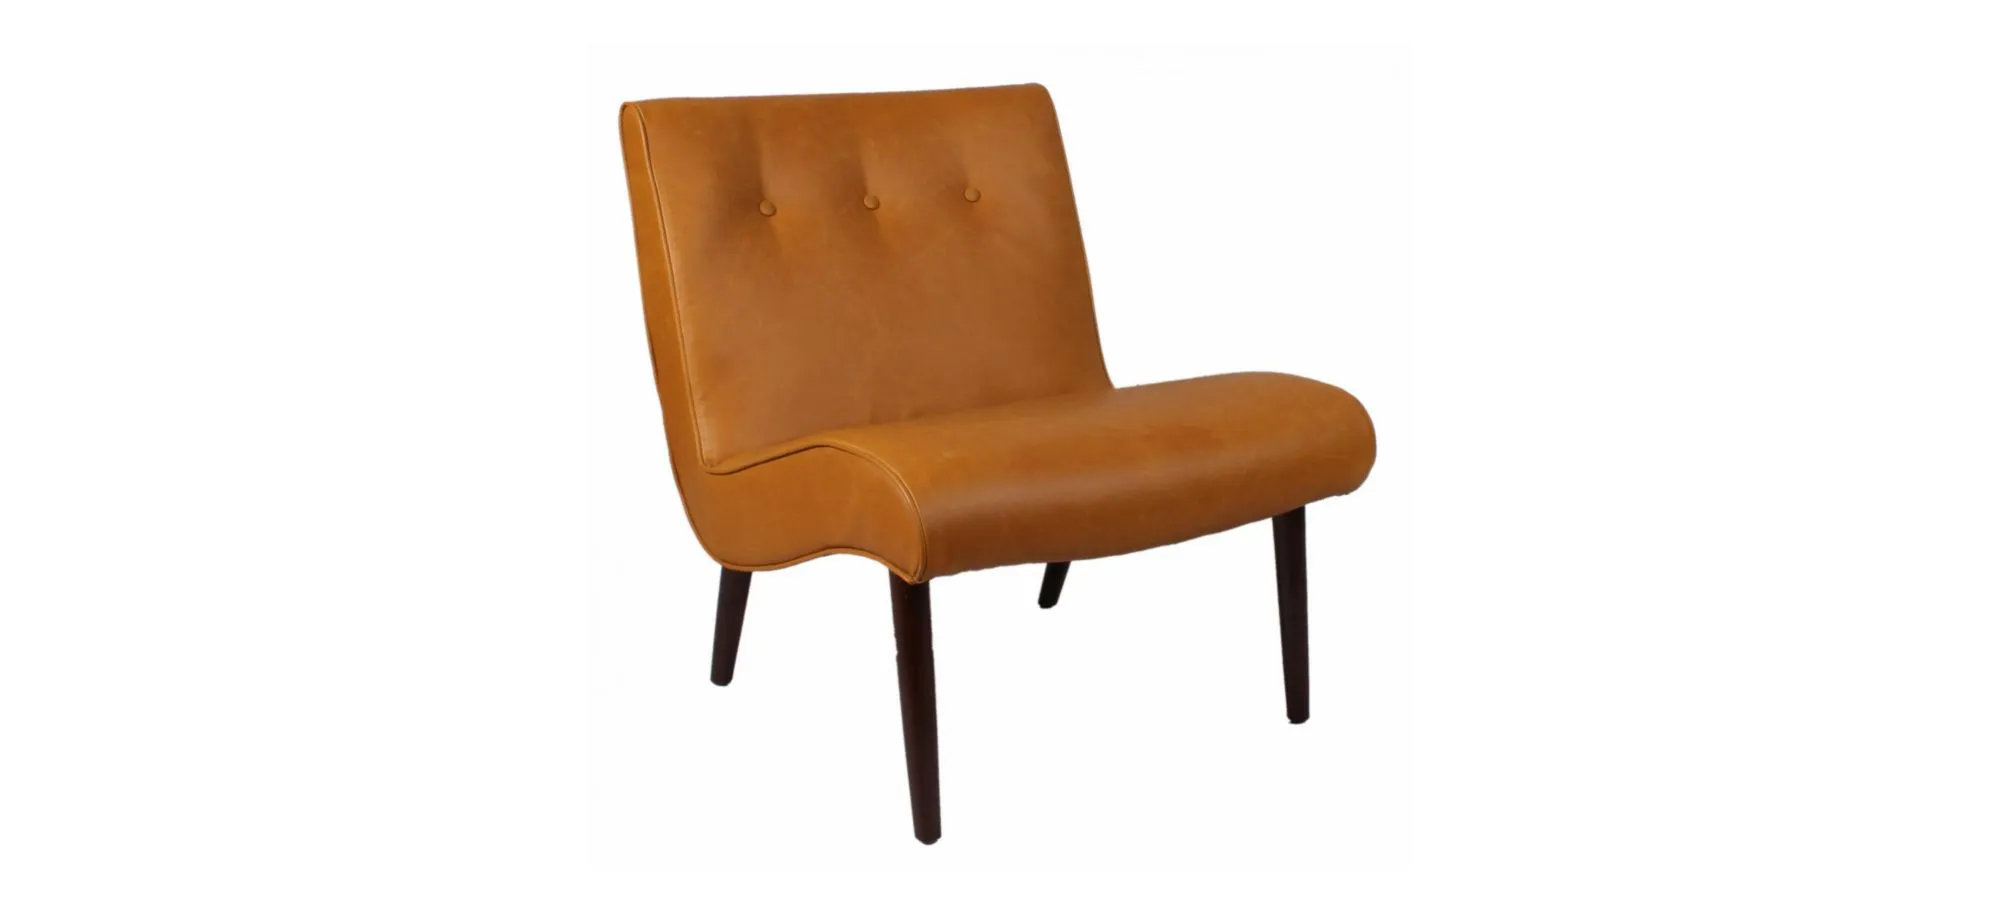 Alexis Living Room Chair in Vintage Caramel by New Pacific Direct